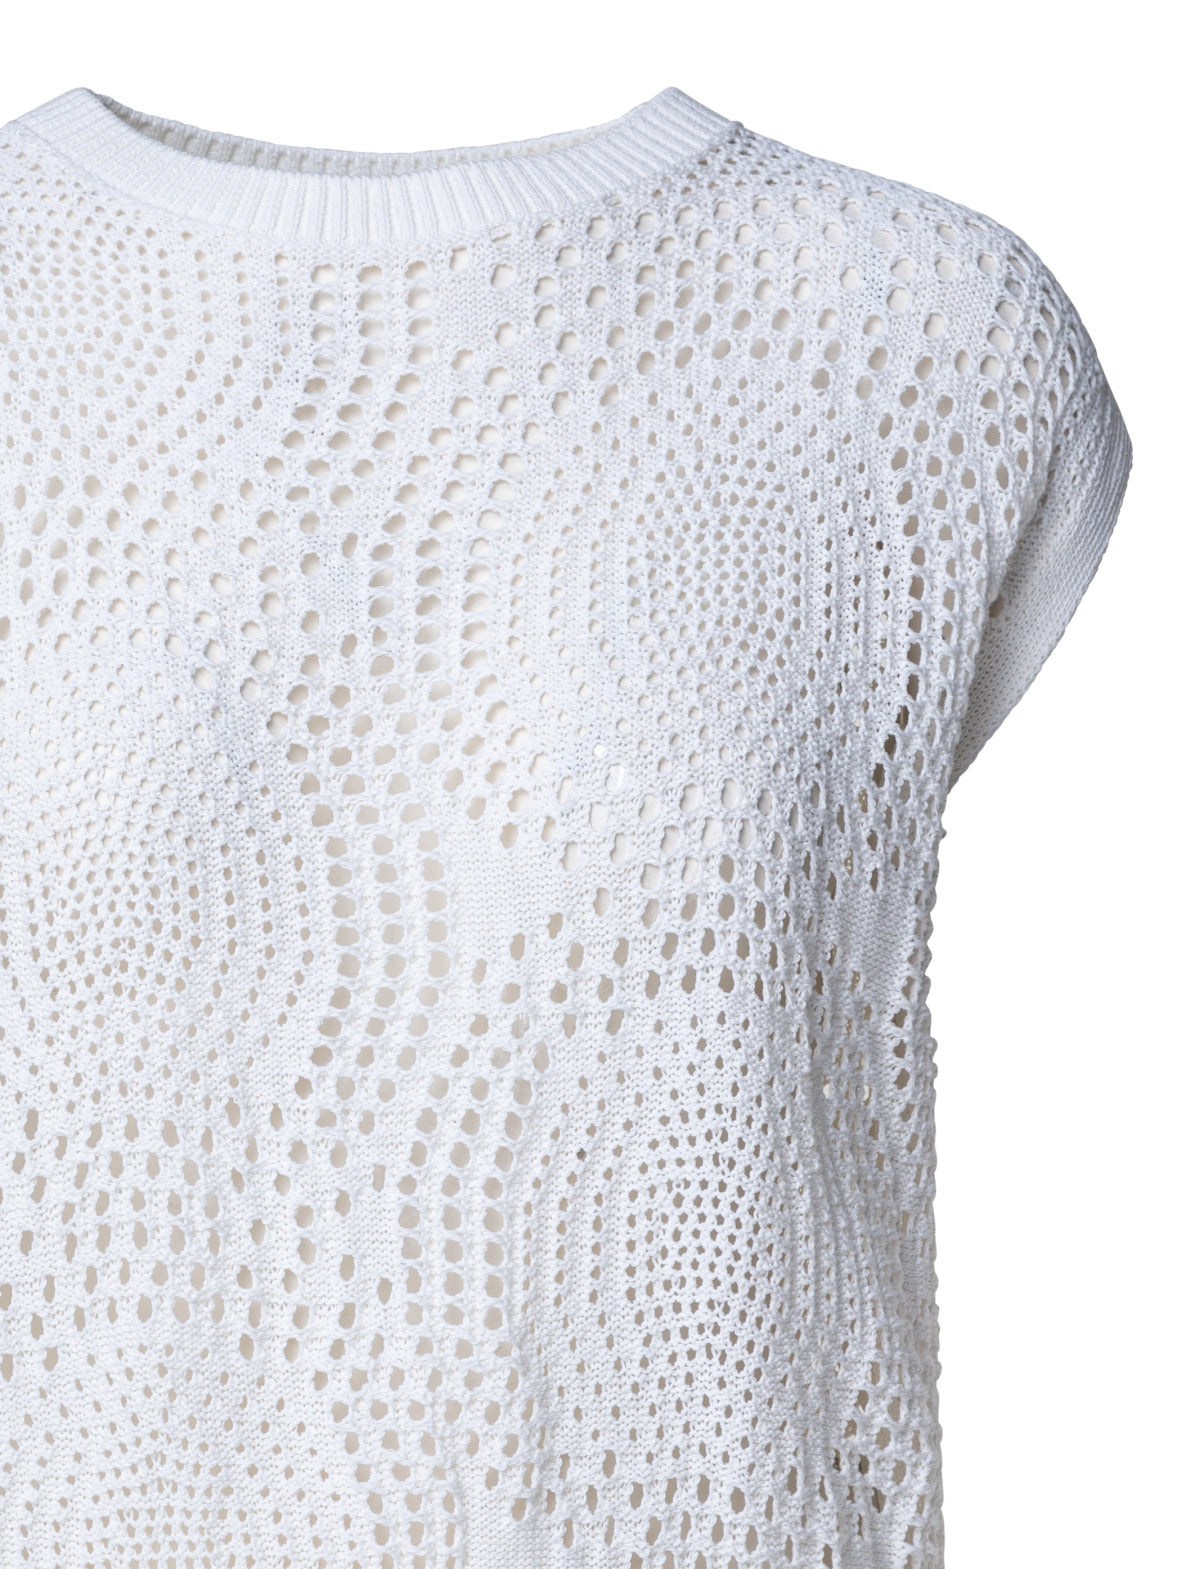 Cotton Dot Mesh Knit Pullover